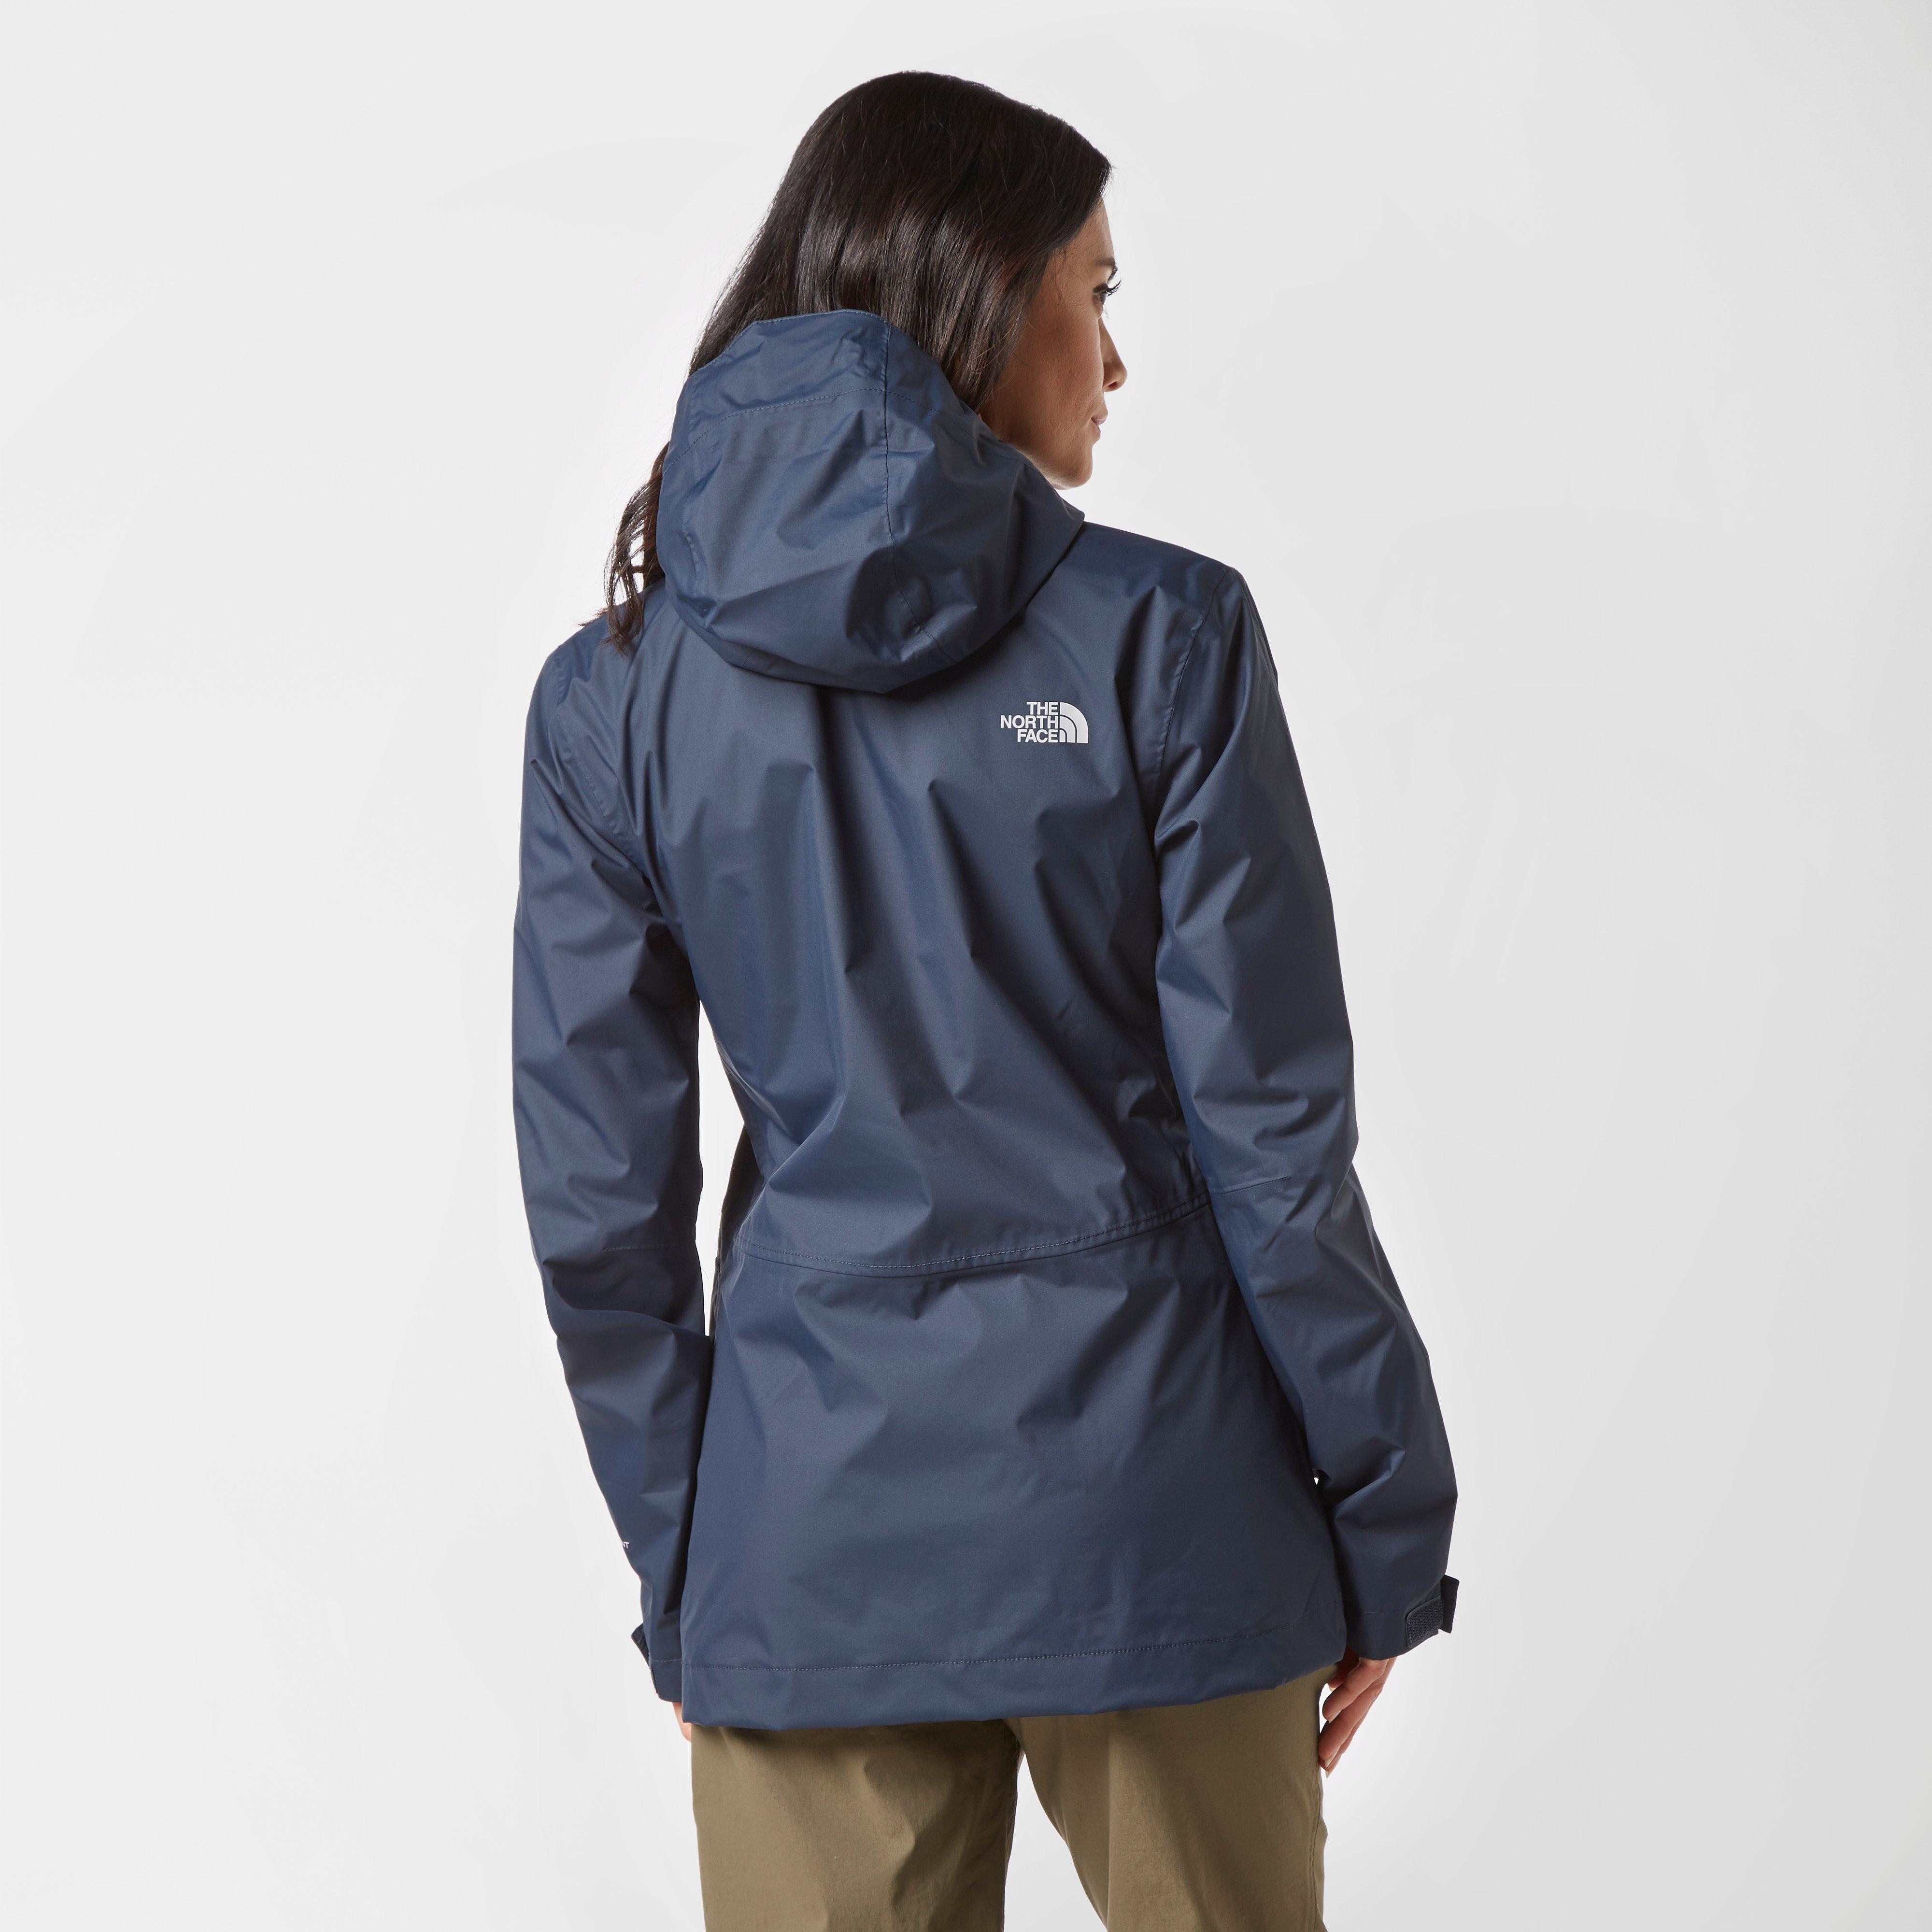 north face exhale waterproof jacket